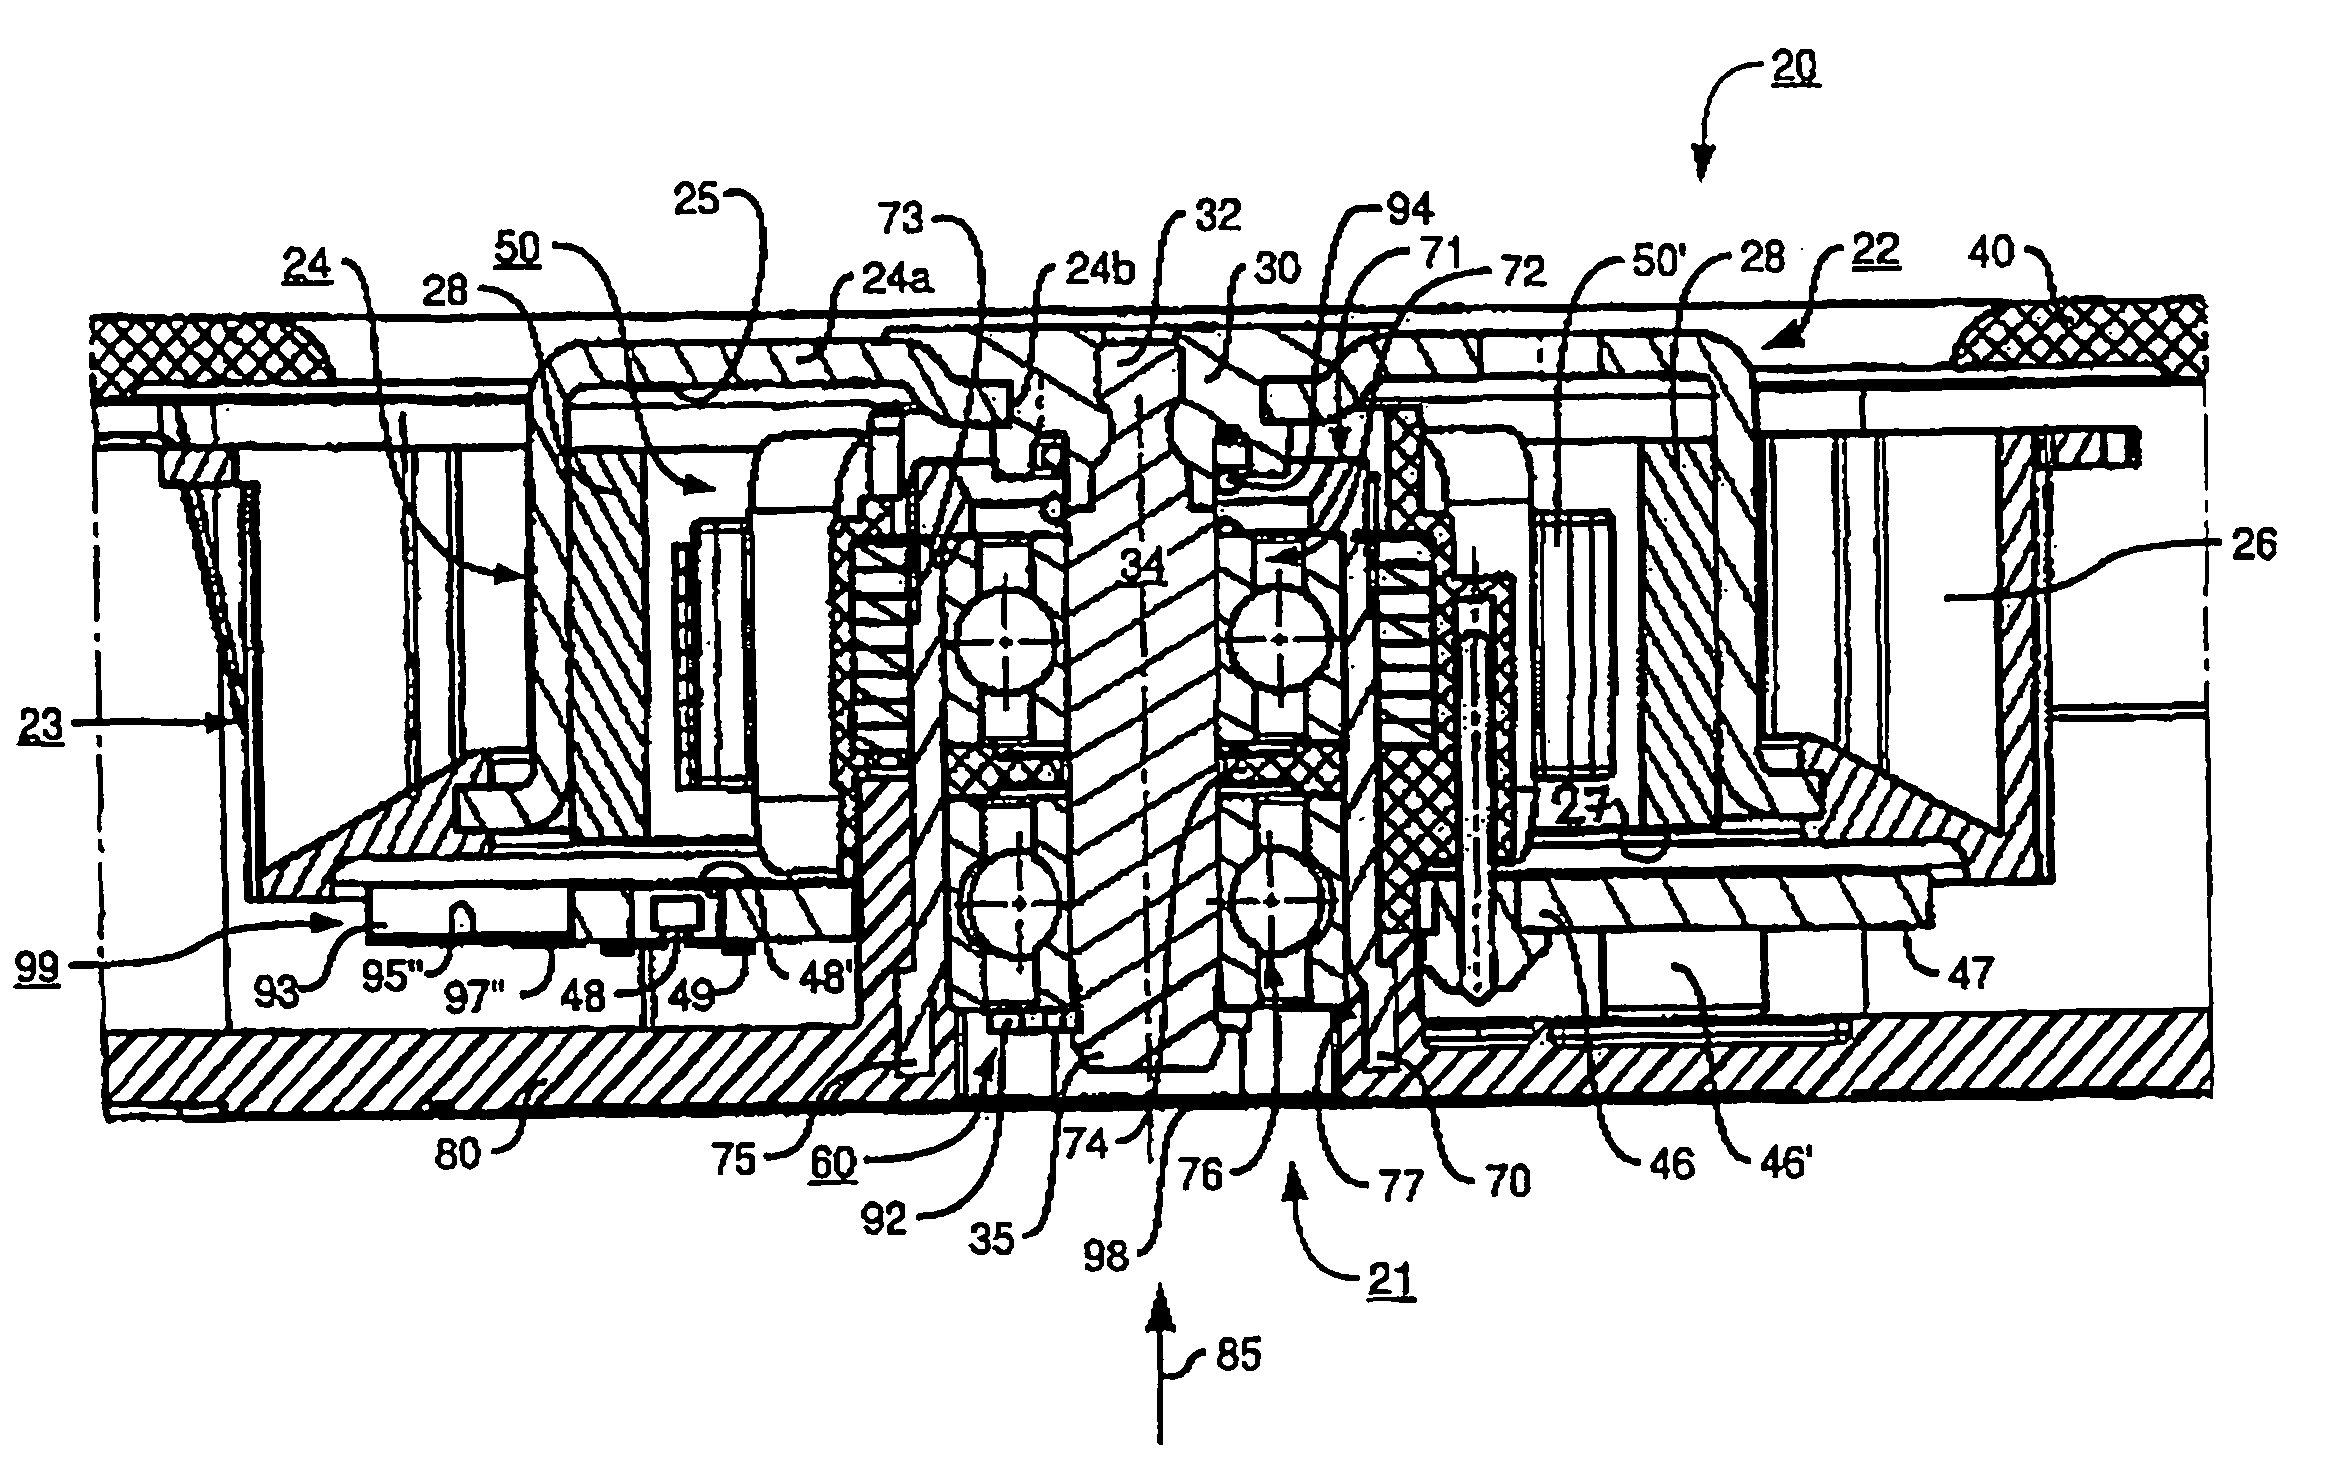 Electronically commutated external rotor motor with a circuit board